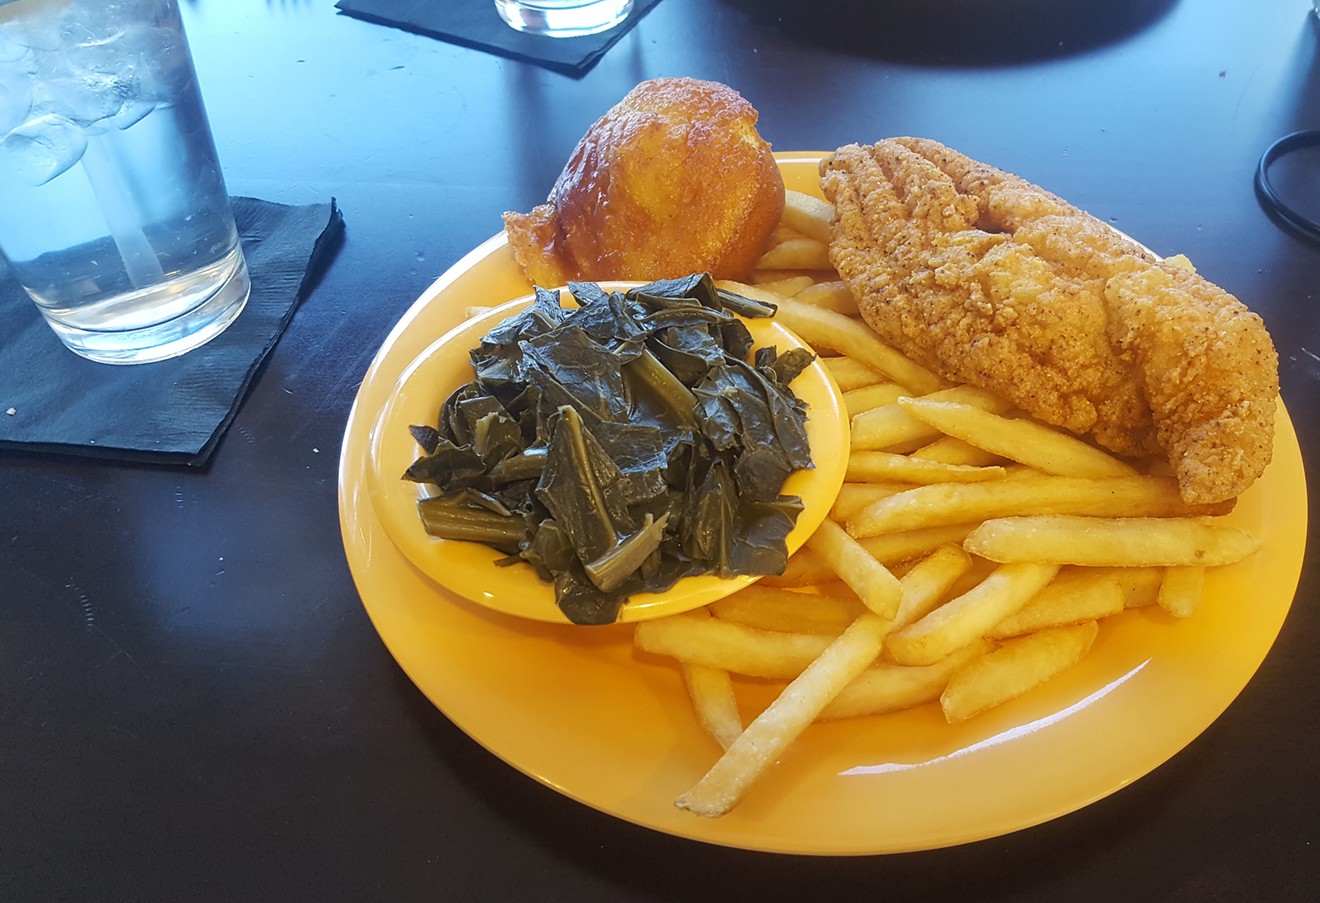 Fried catfish and sides